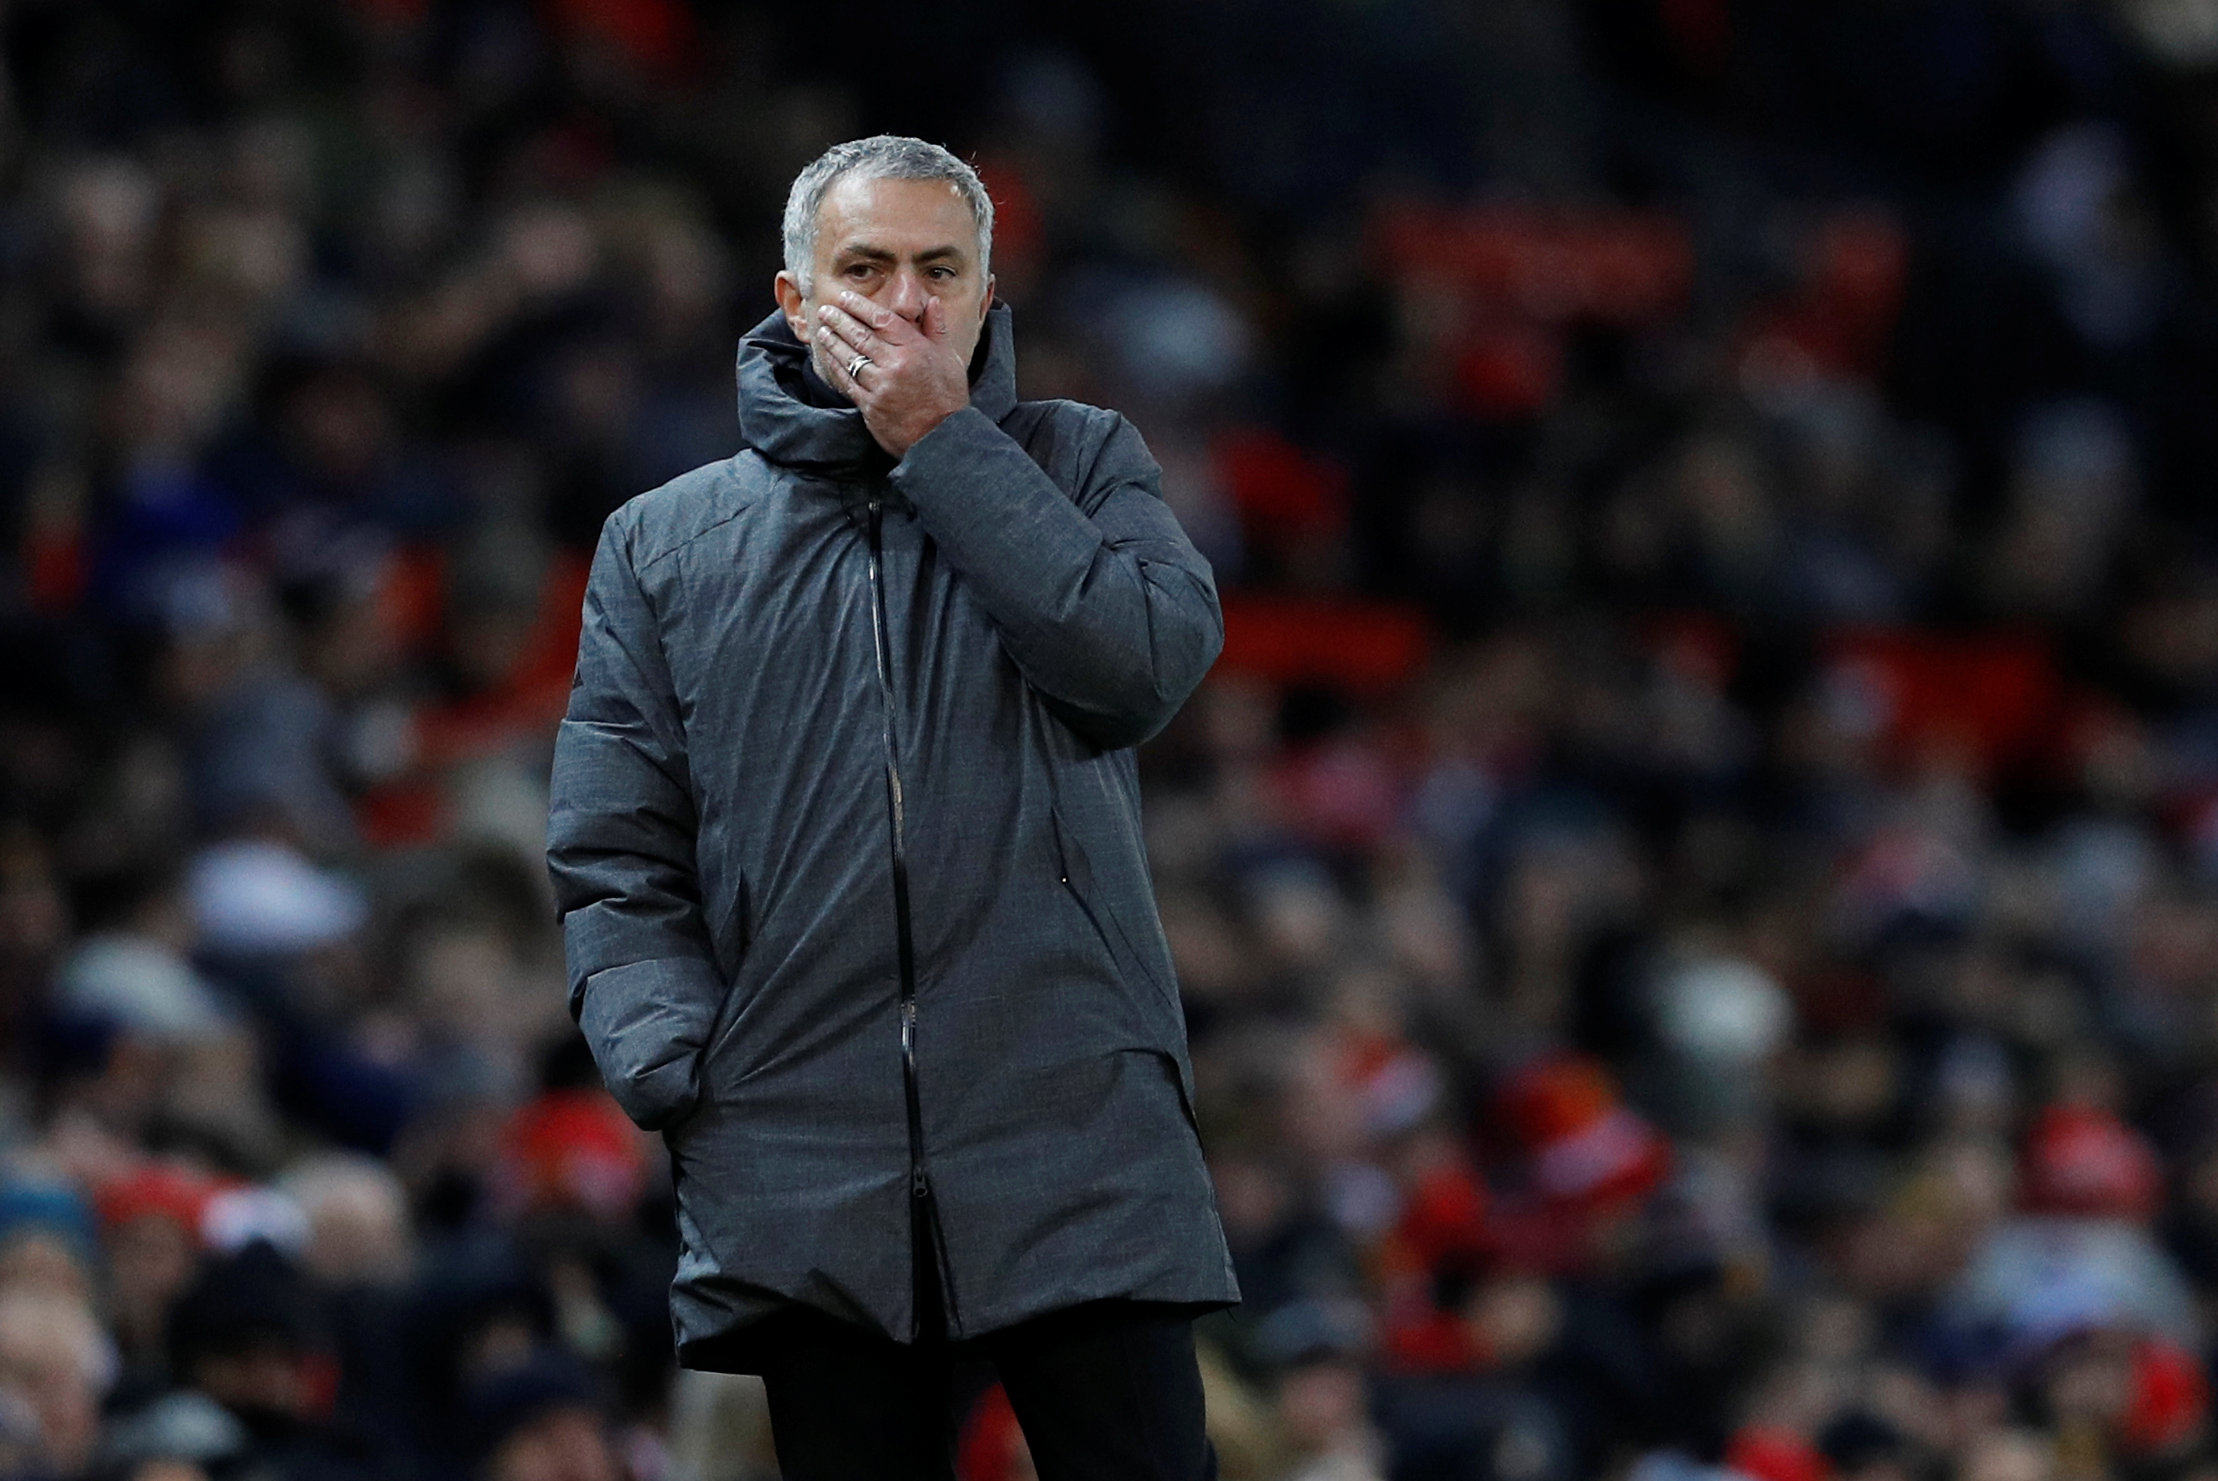 Football: Mourinho unsure if United can deny City title